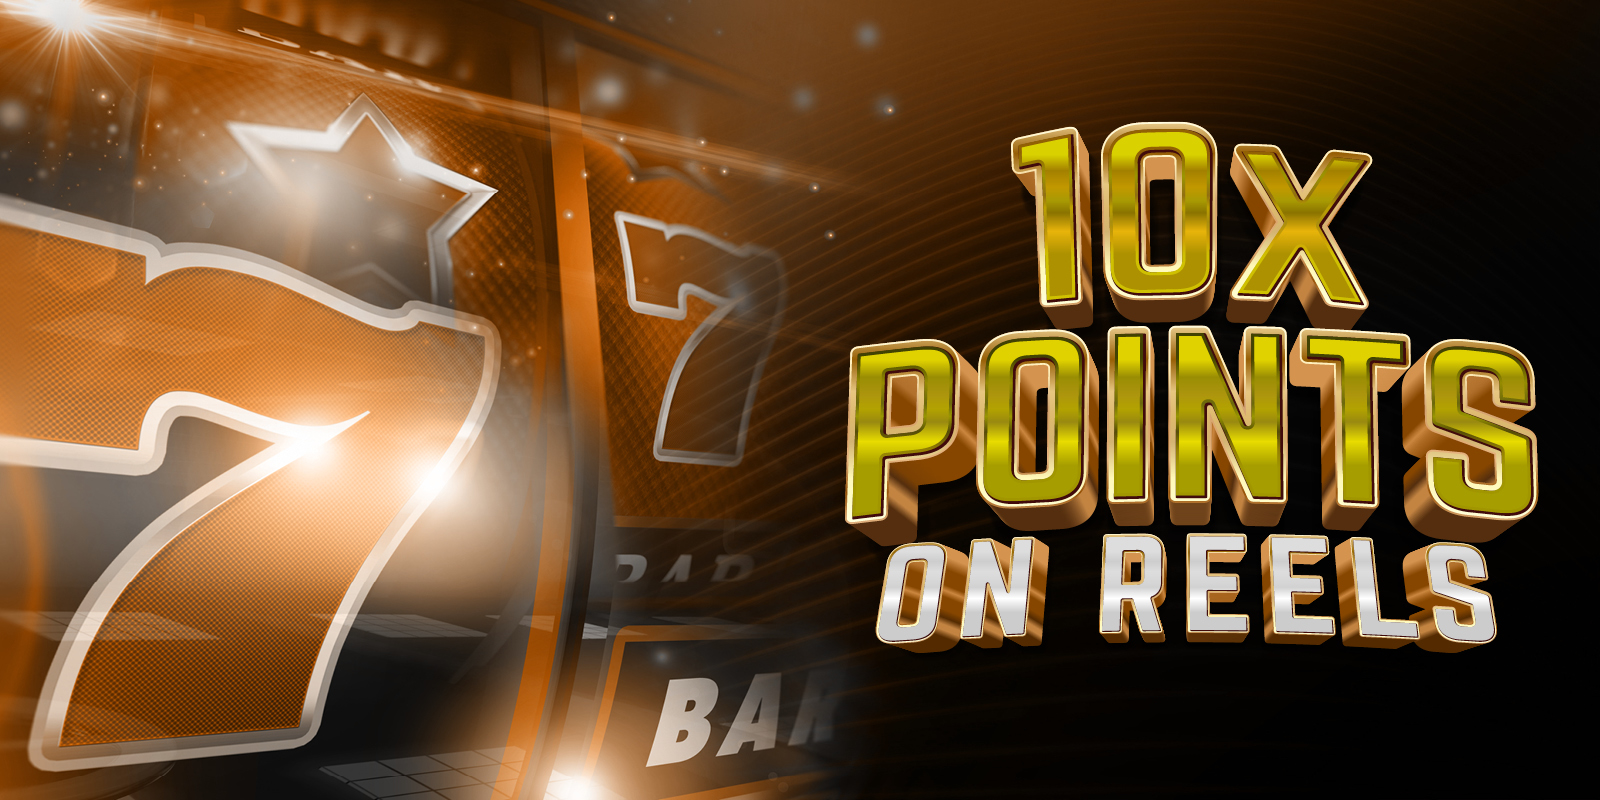 10x points on reels creative showing 7's on a slot machine